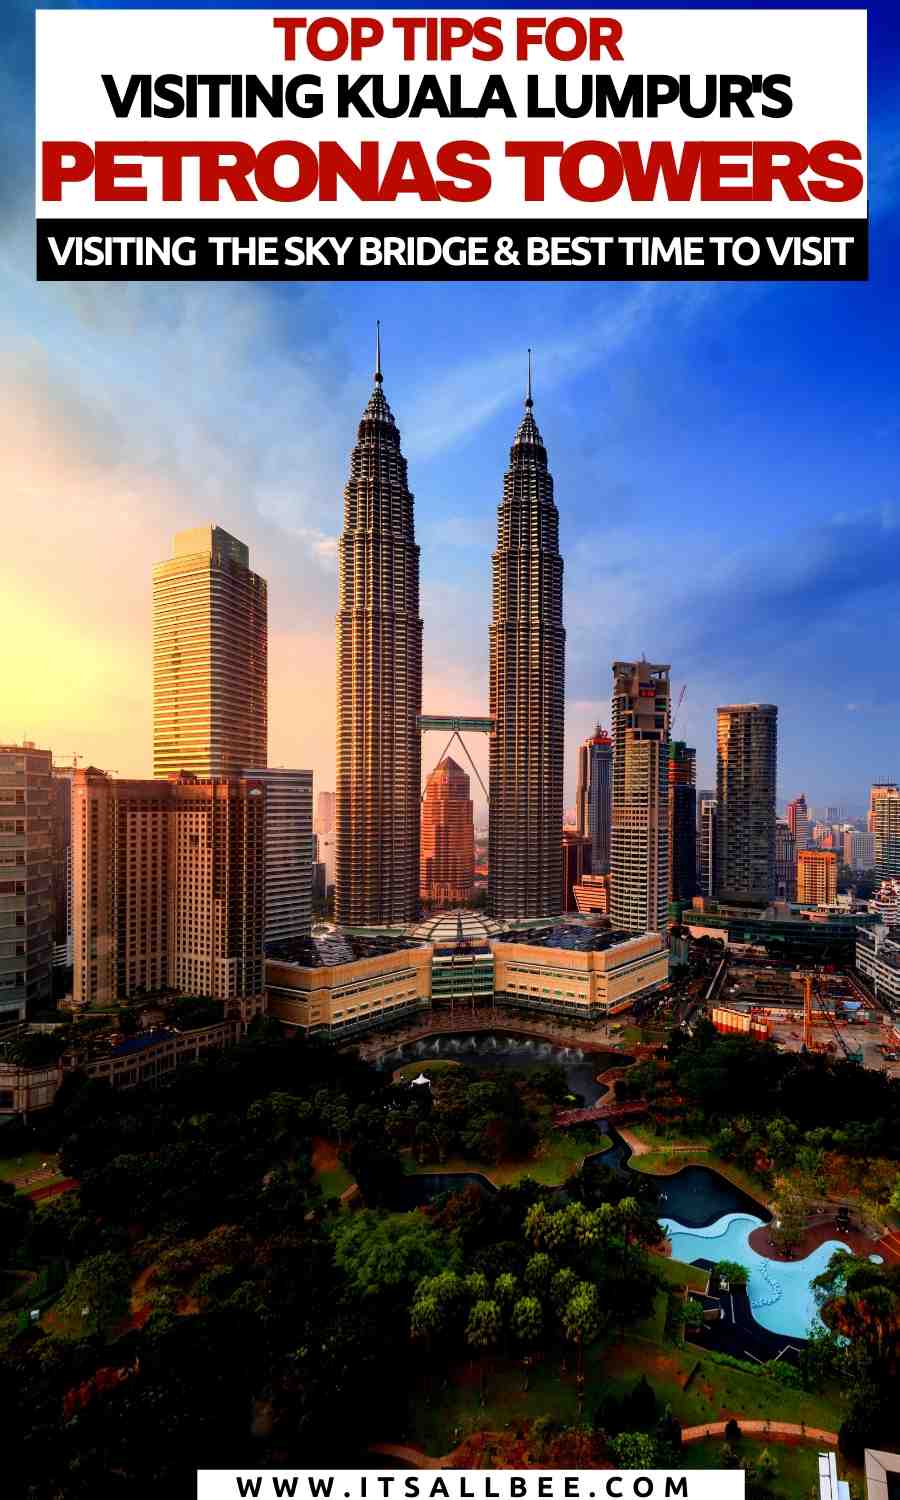 petronas towers tickets online booking | visiting the petronas towers